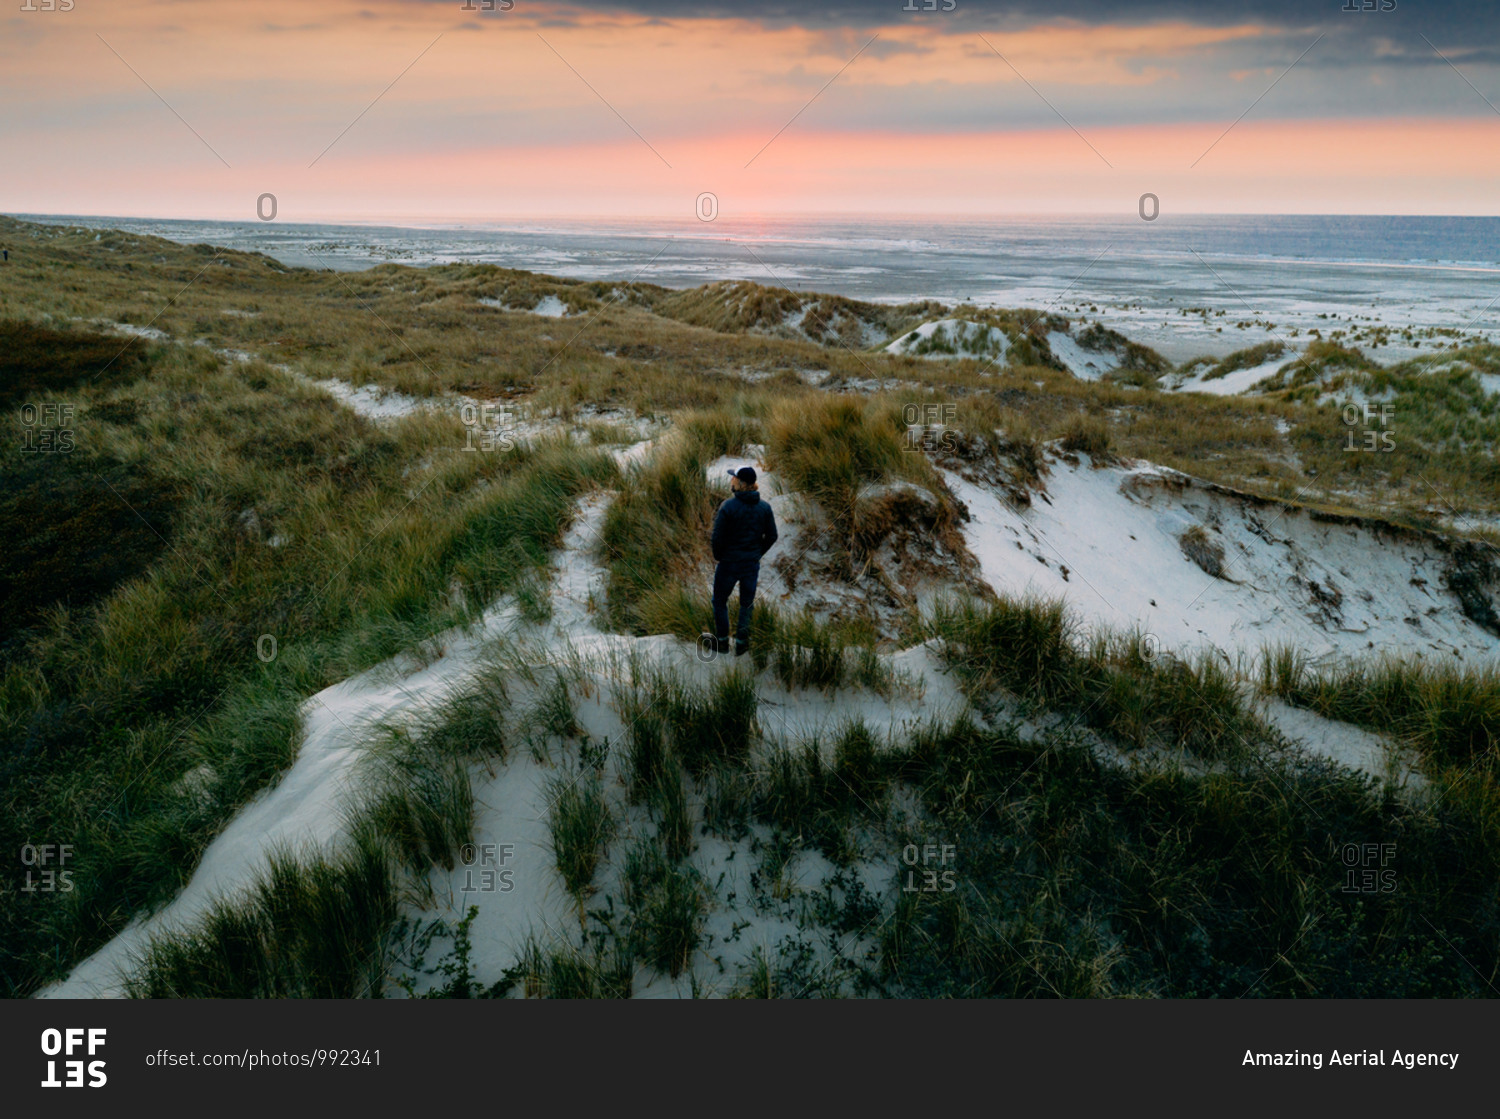 Aerial view of man standing on top of the dunes overlooking the ocean during sunset on the island Terschelling, Friesland, The Netherlands.